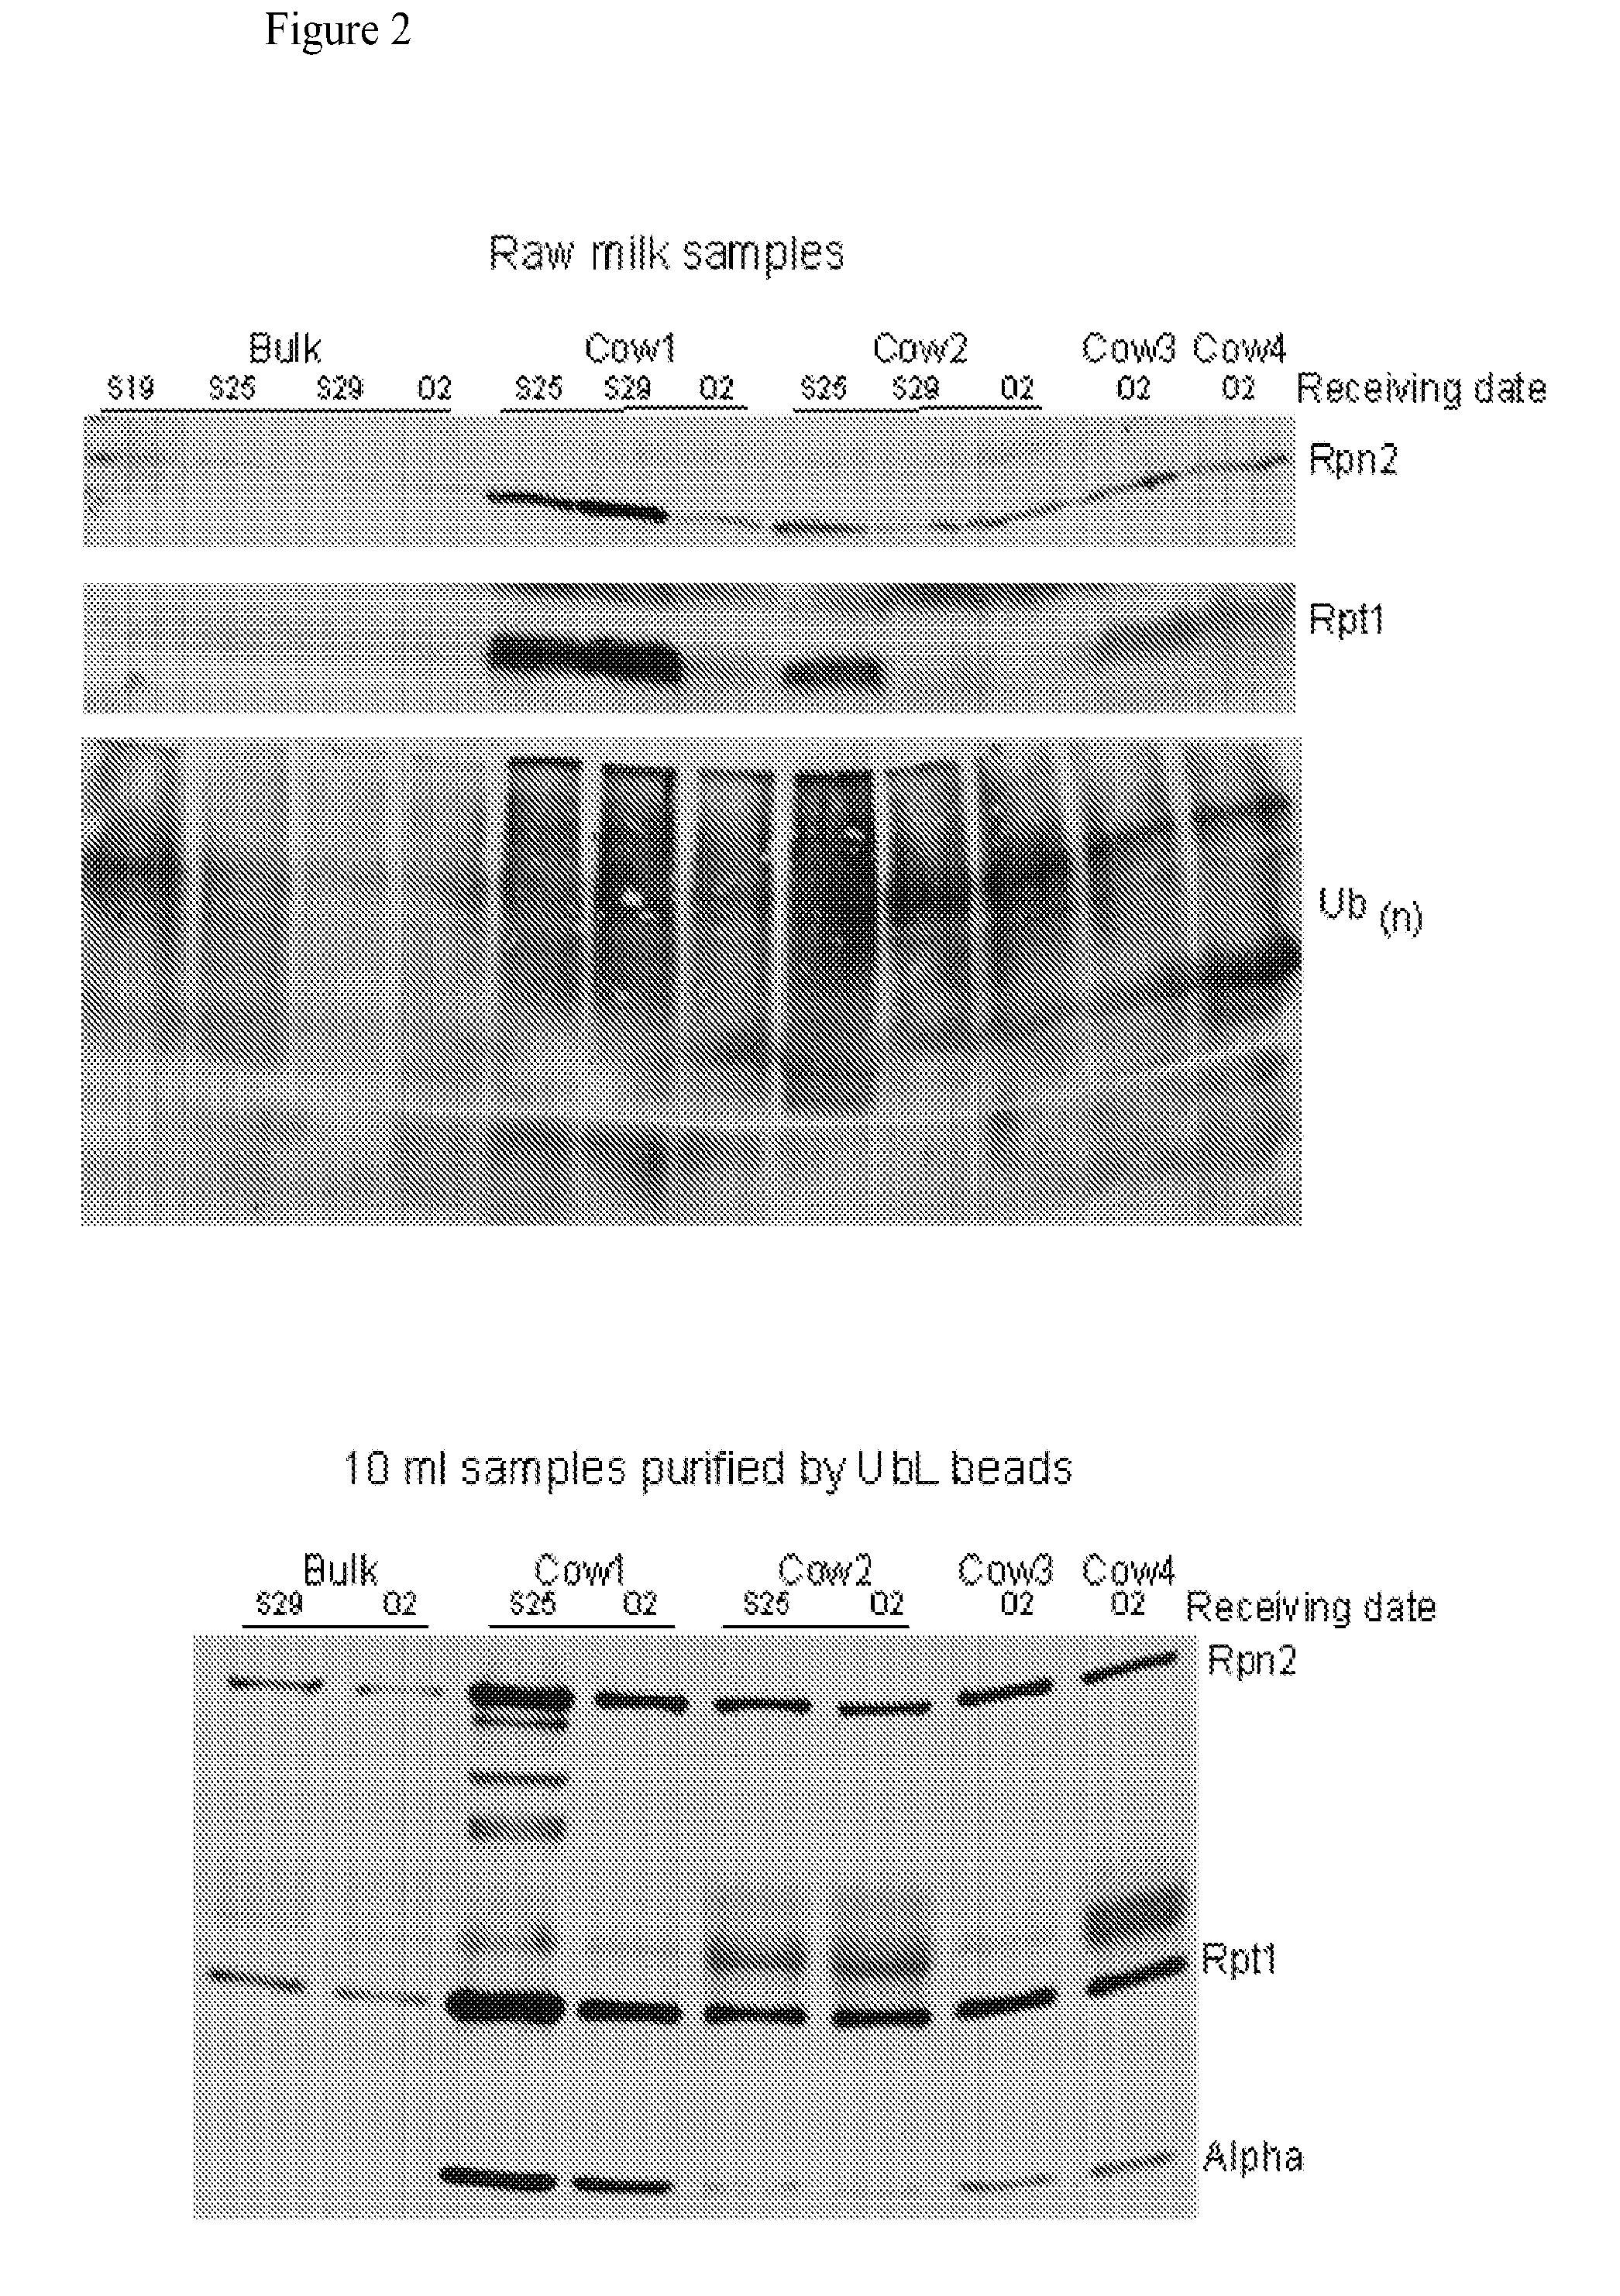 Systems for and Methods of Detecting Mastitis